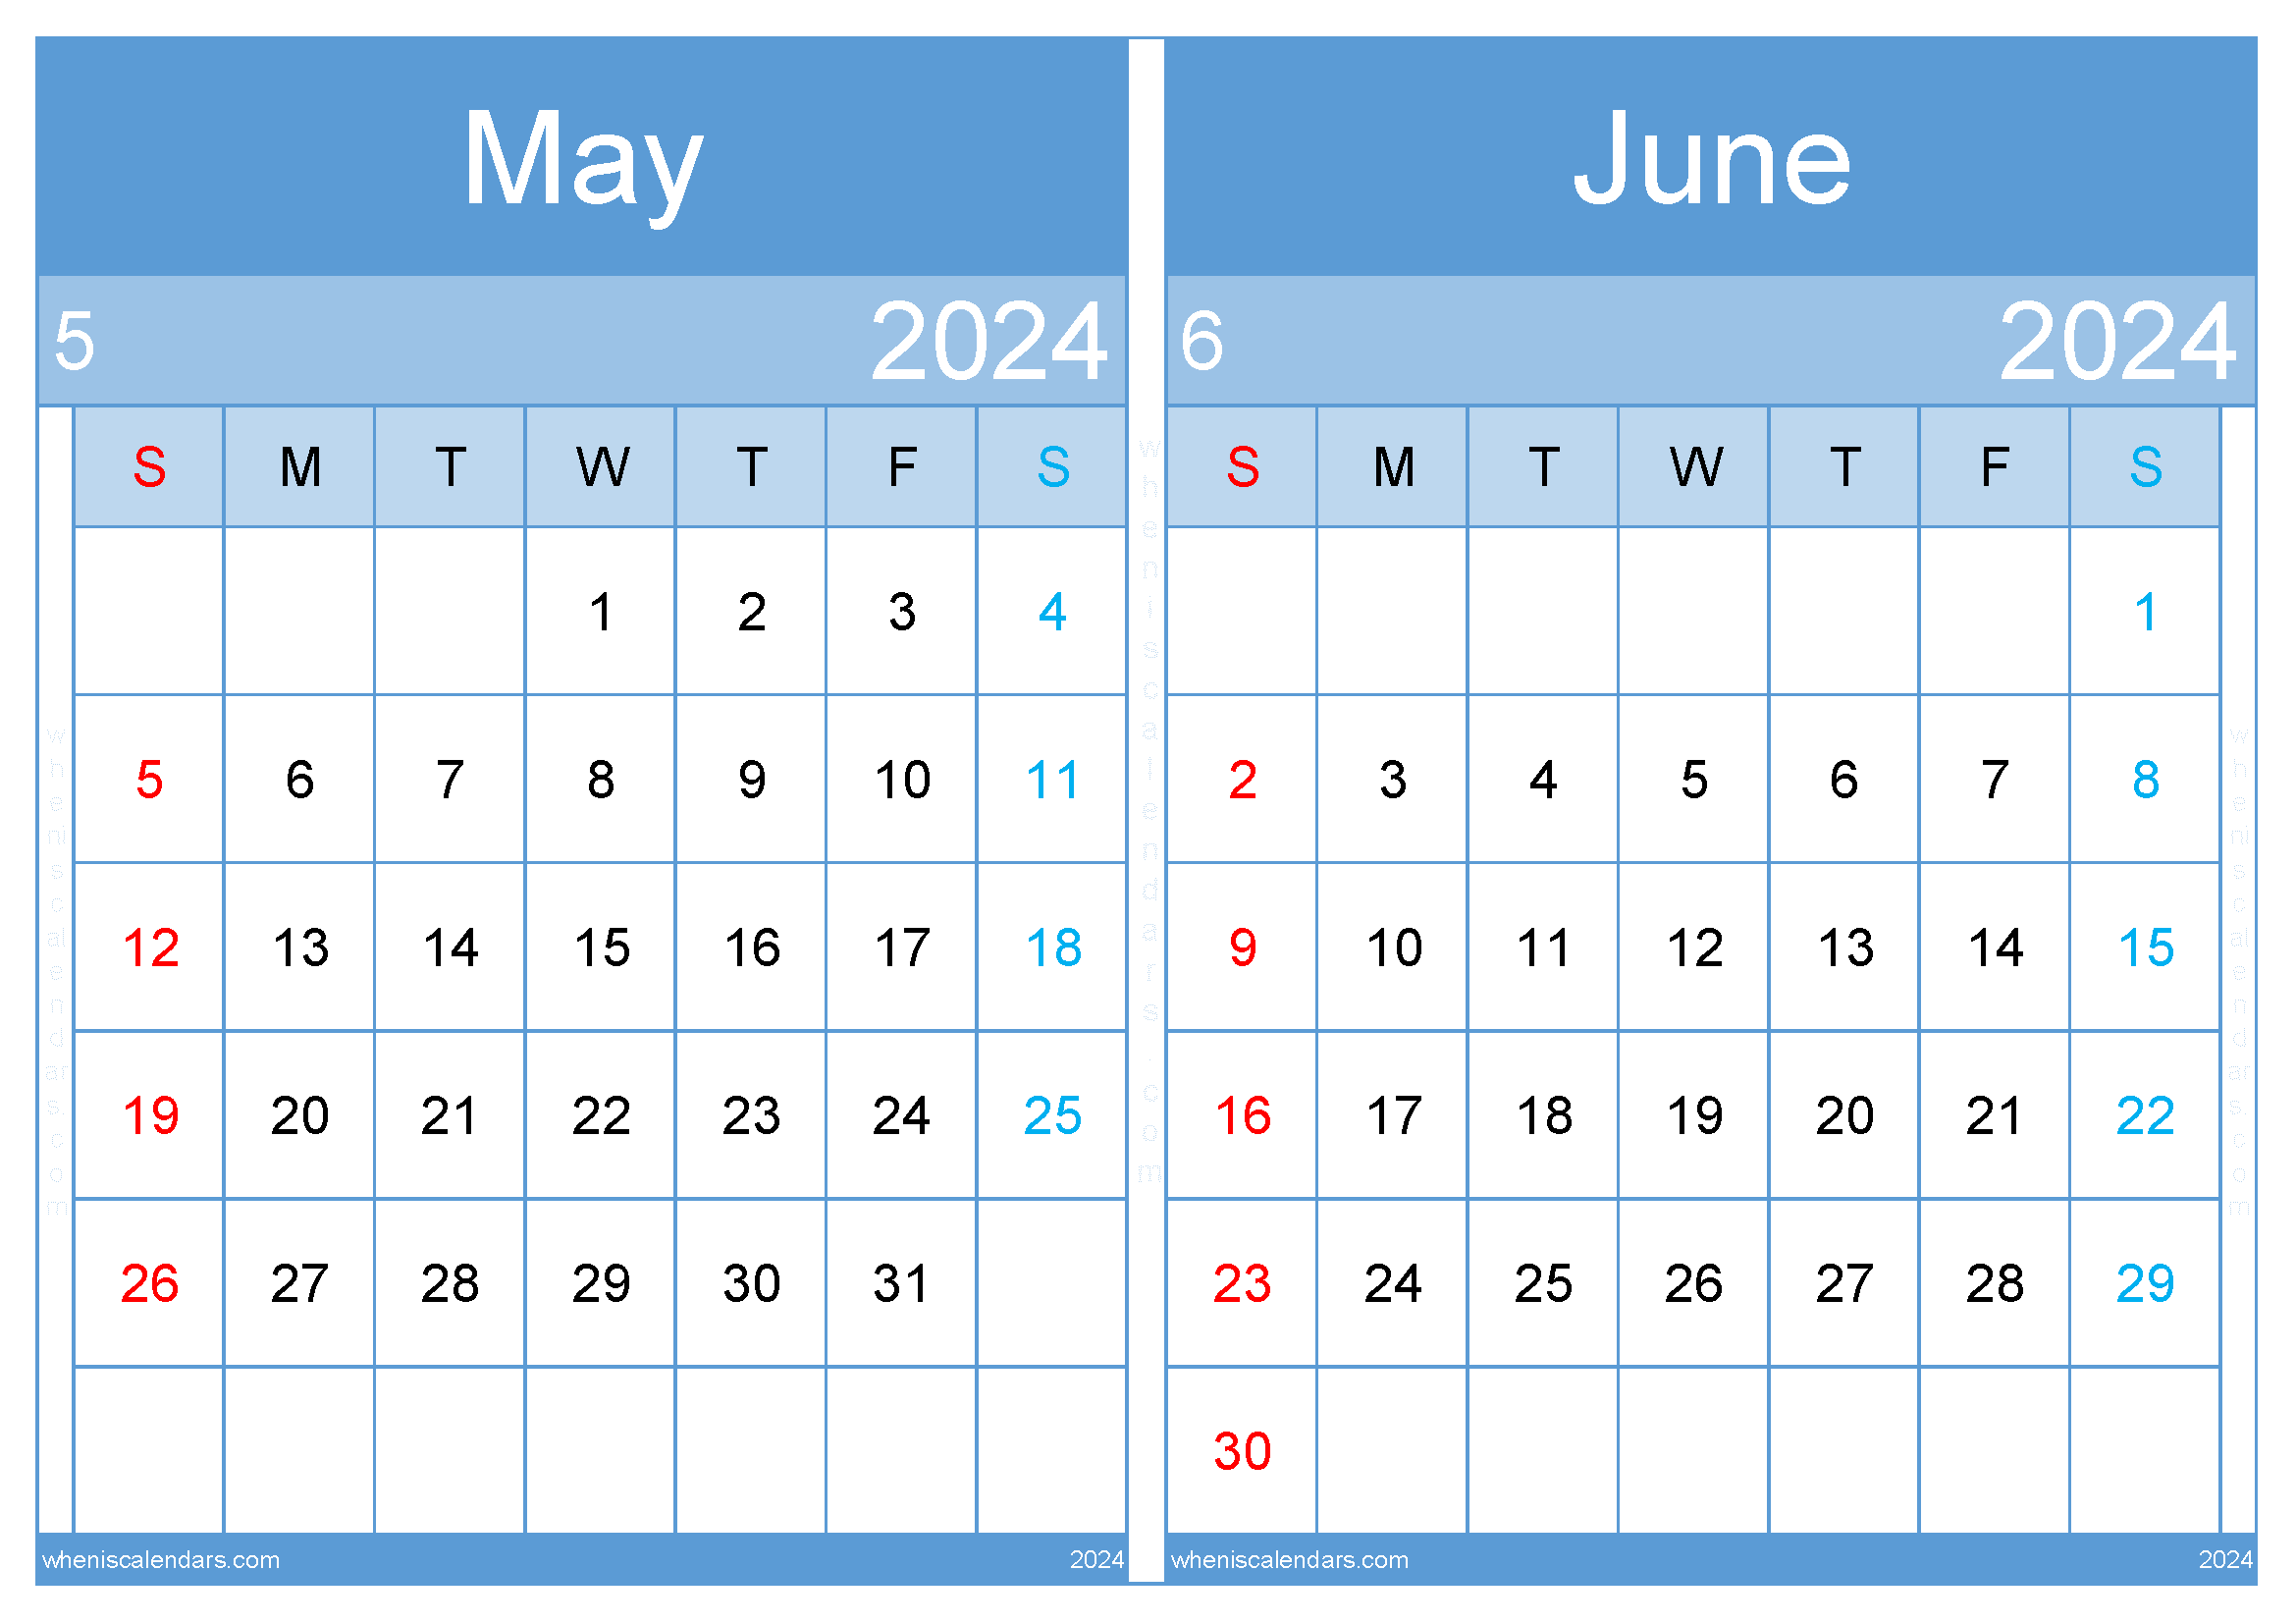 Download calendar 2024 May and June A4 MJ24036